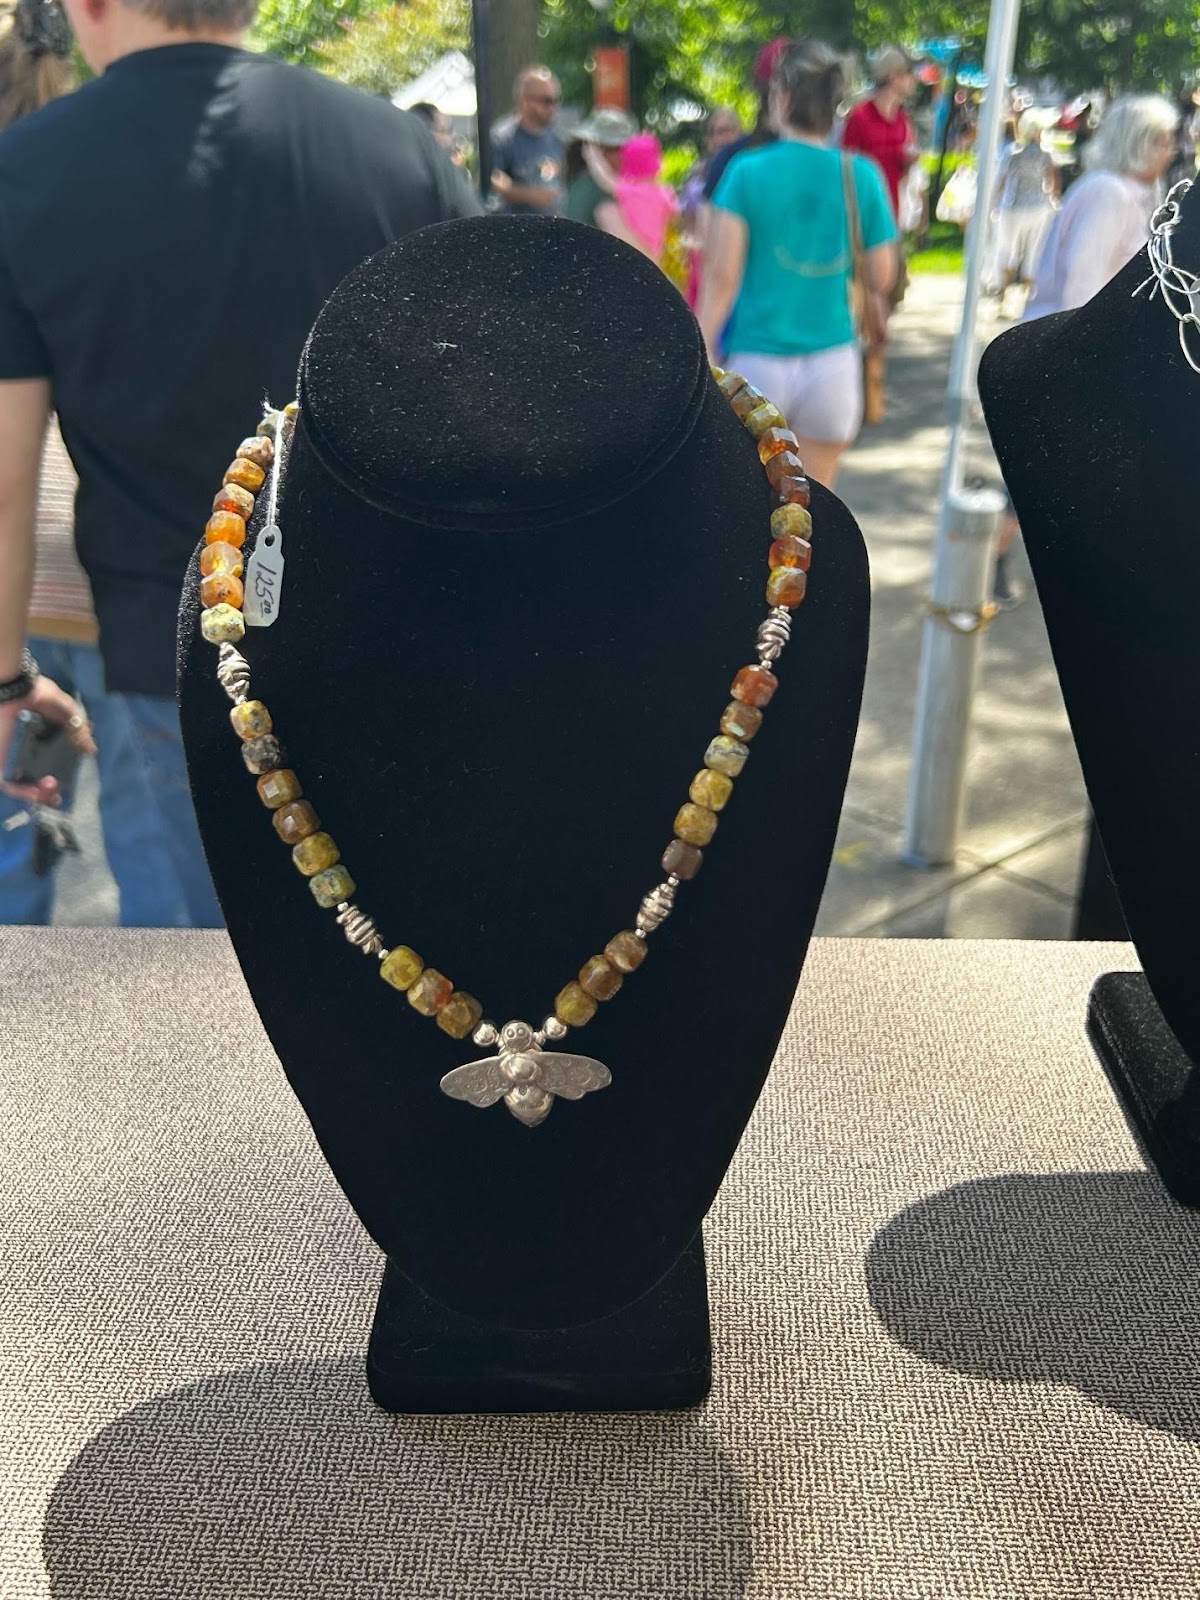 A necklace on a mannequin

Description automatically generated